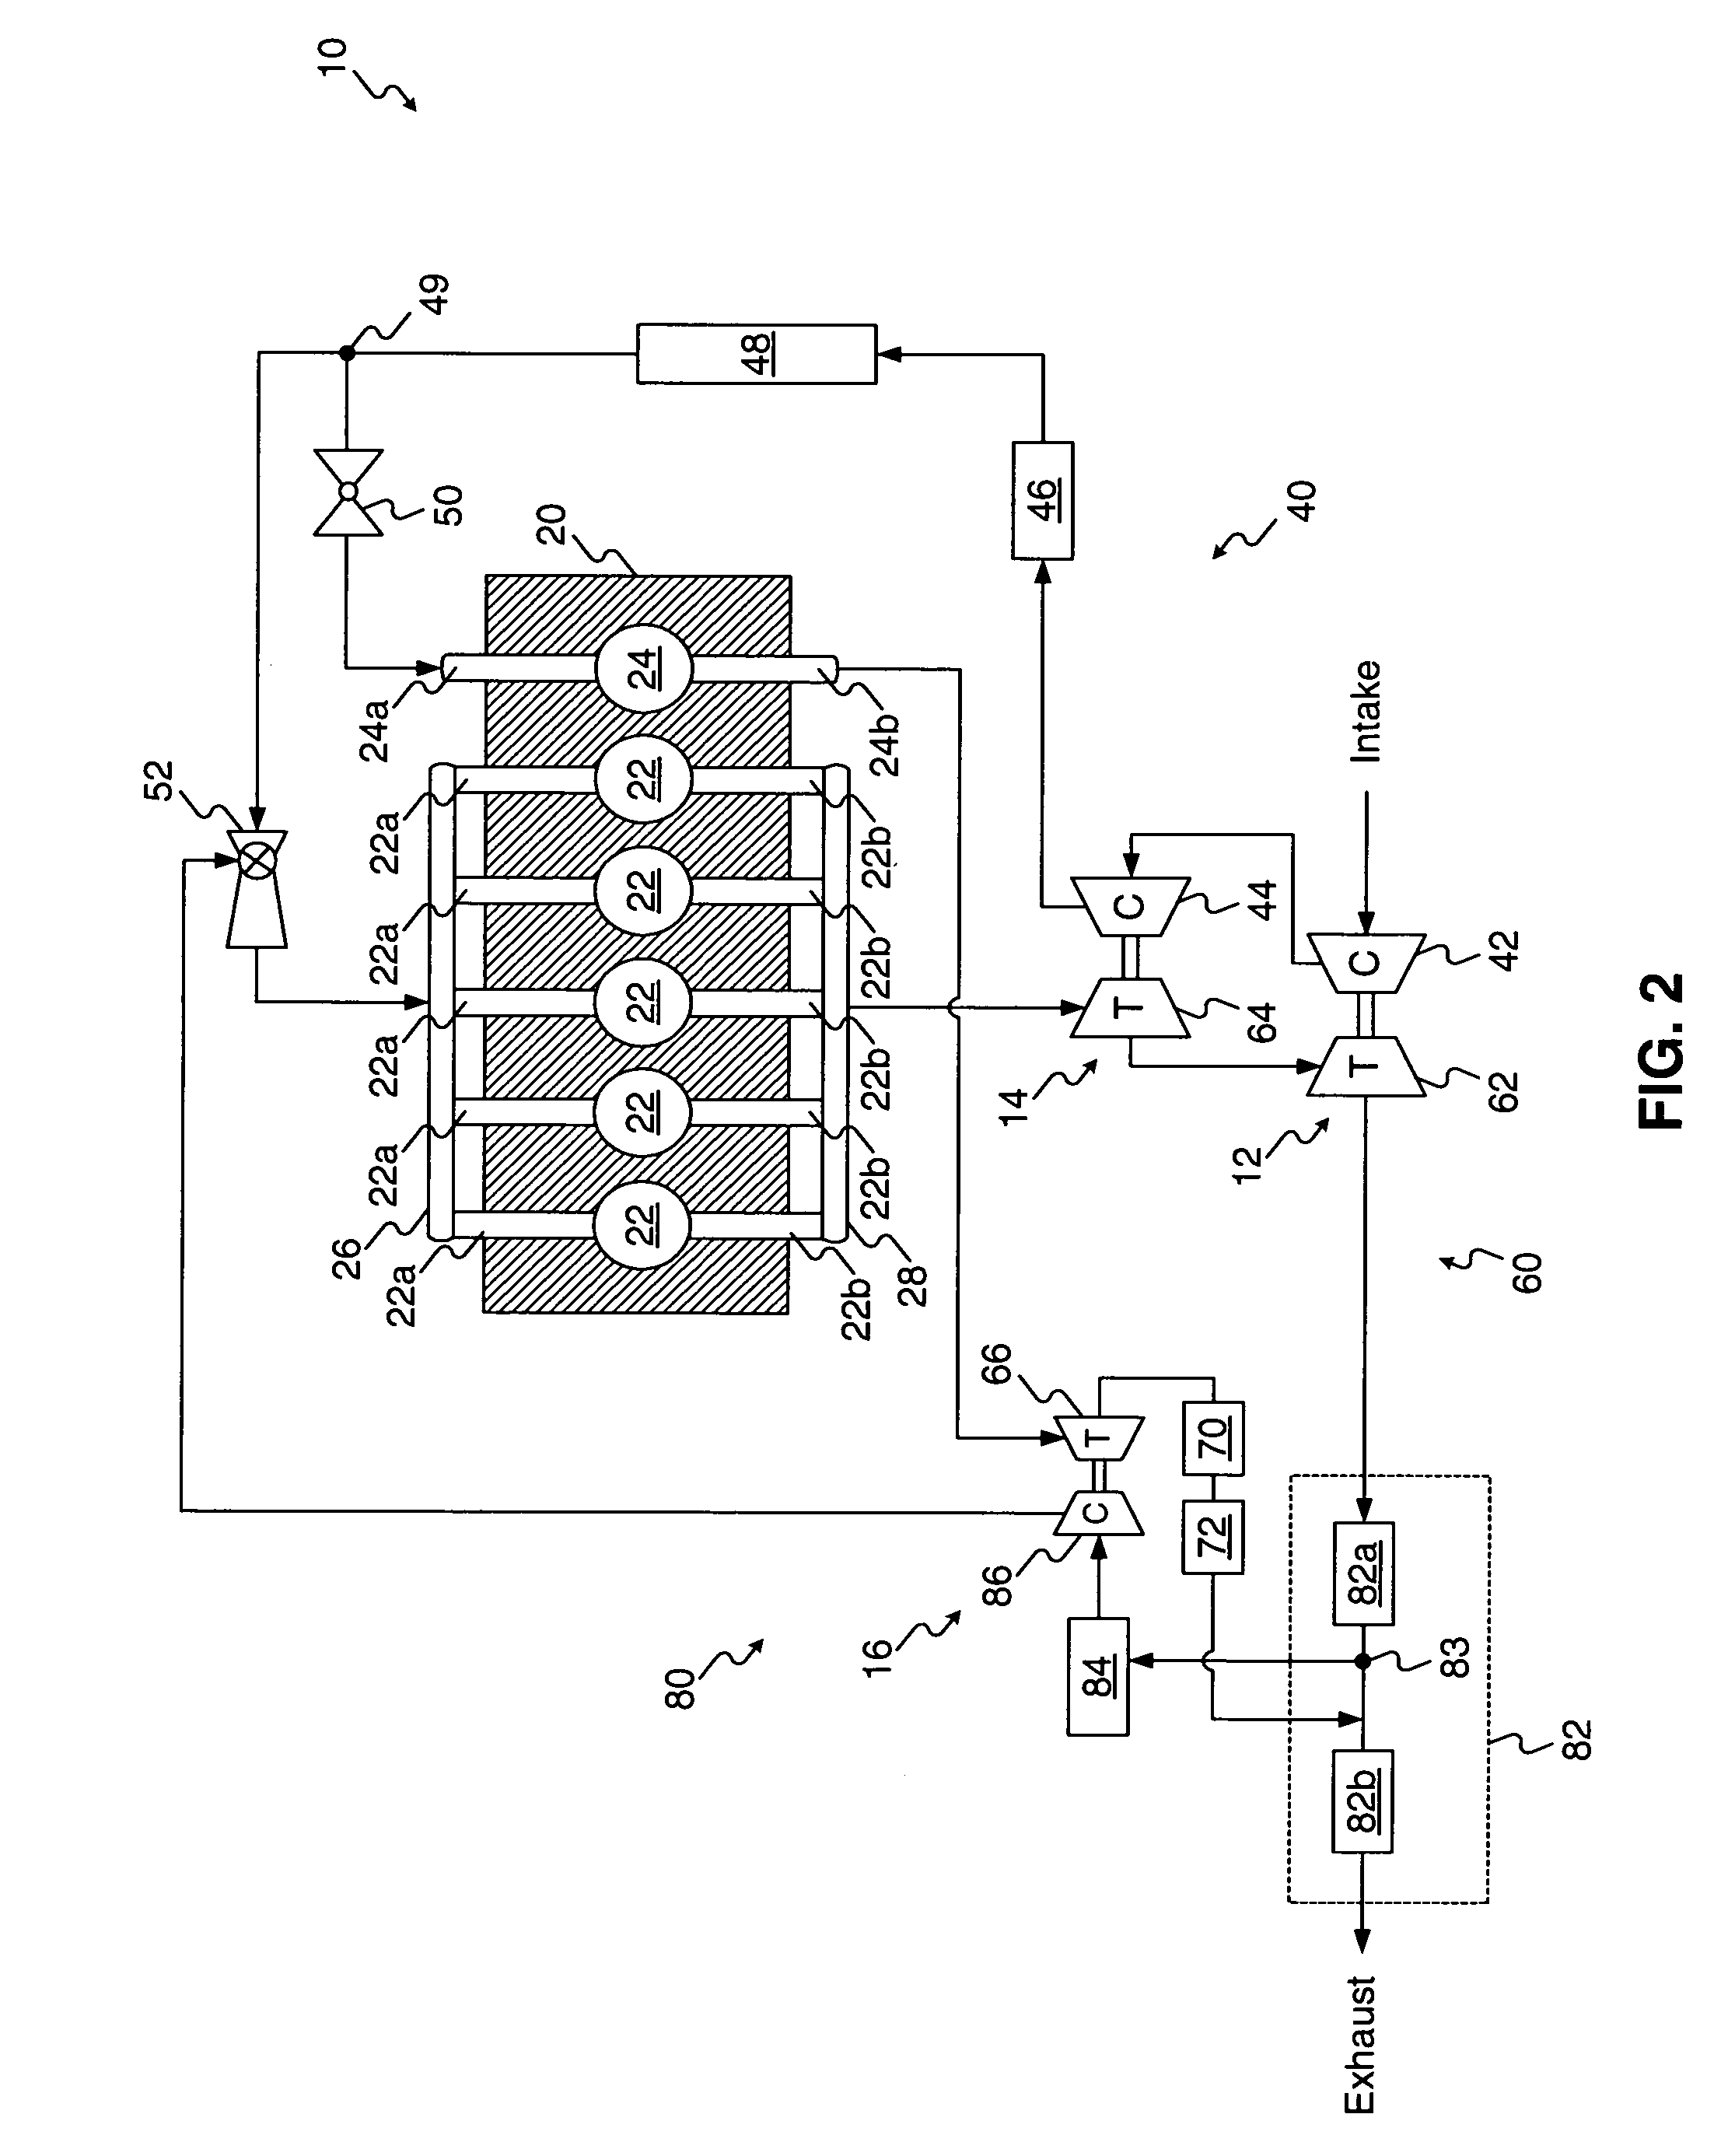 Turbocharged exhaust gas recirculation system